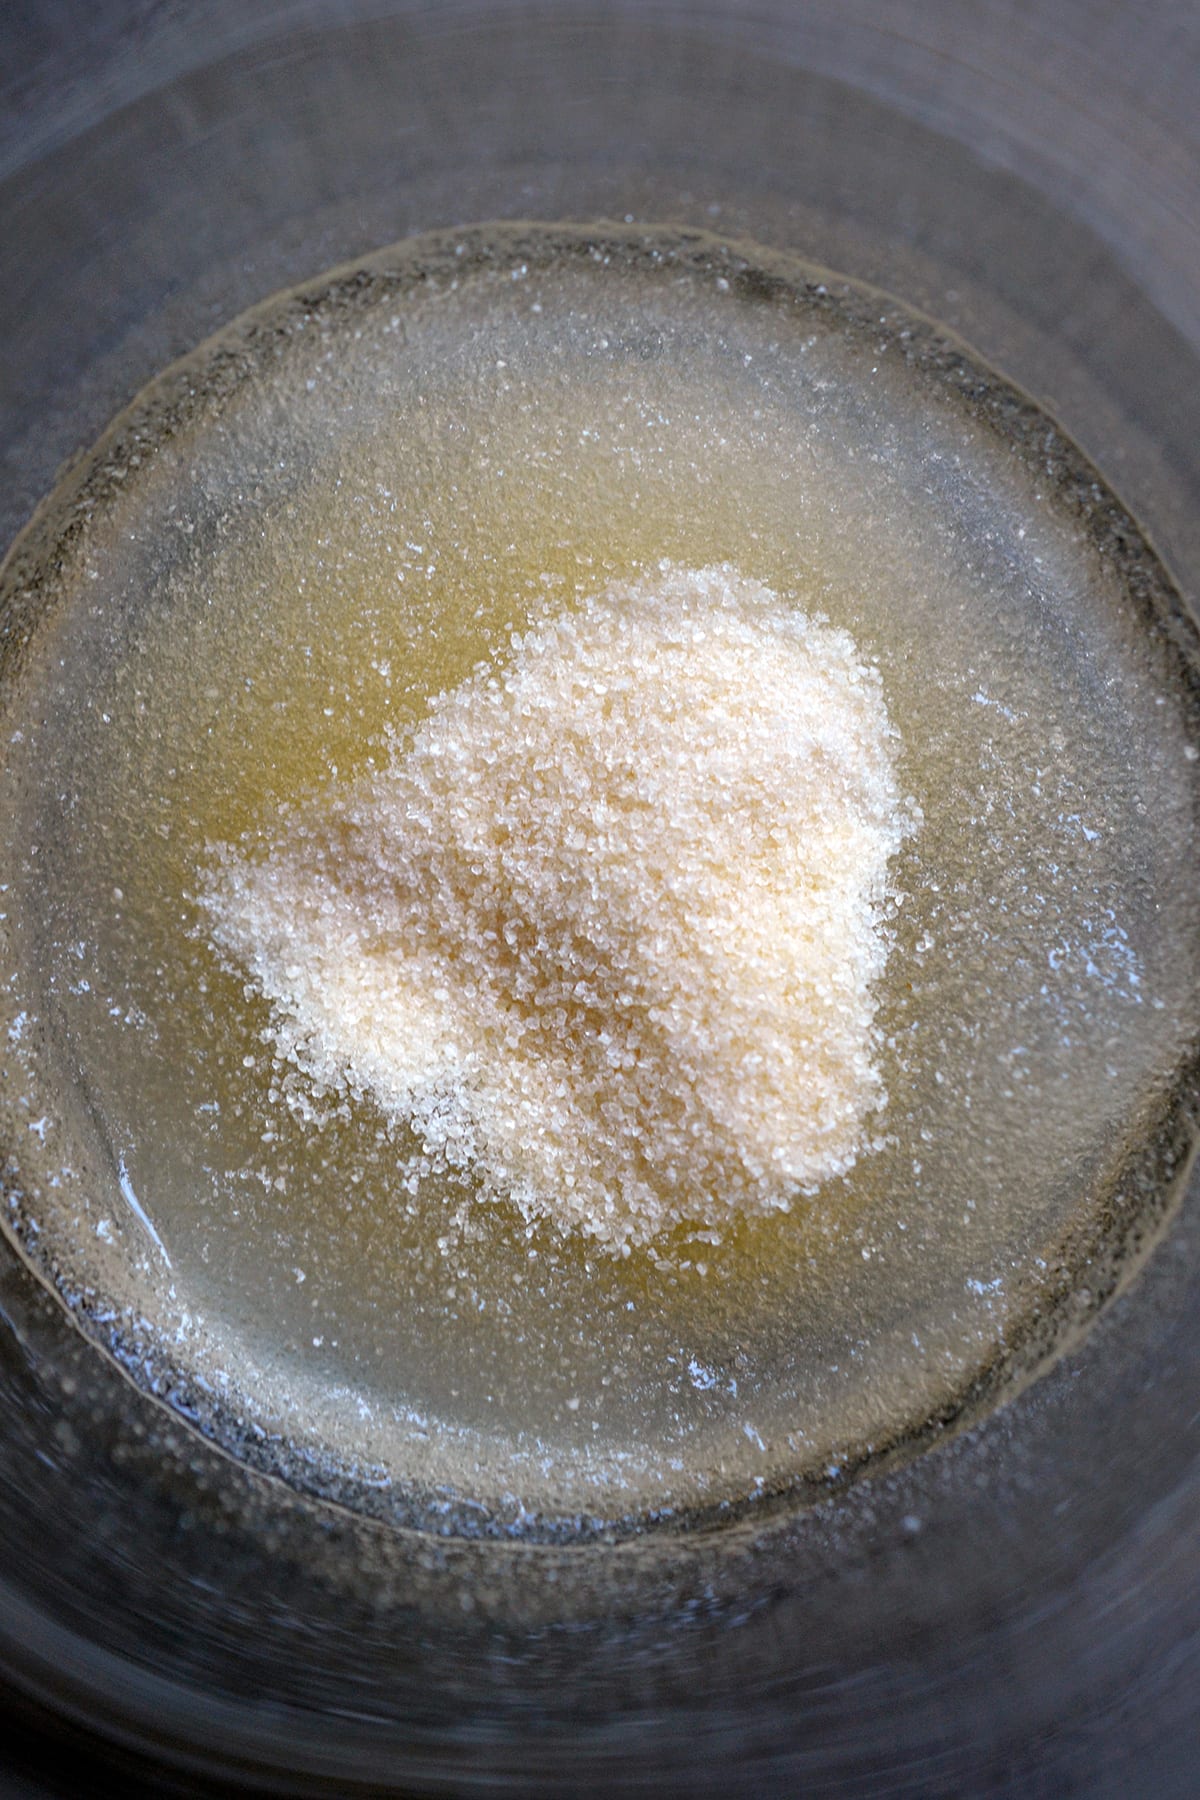 Powdered gelatin blooming in a small glass.